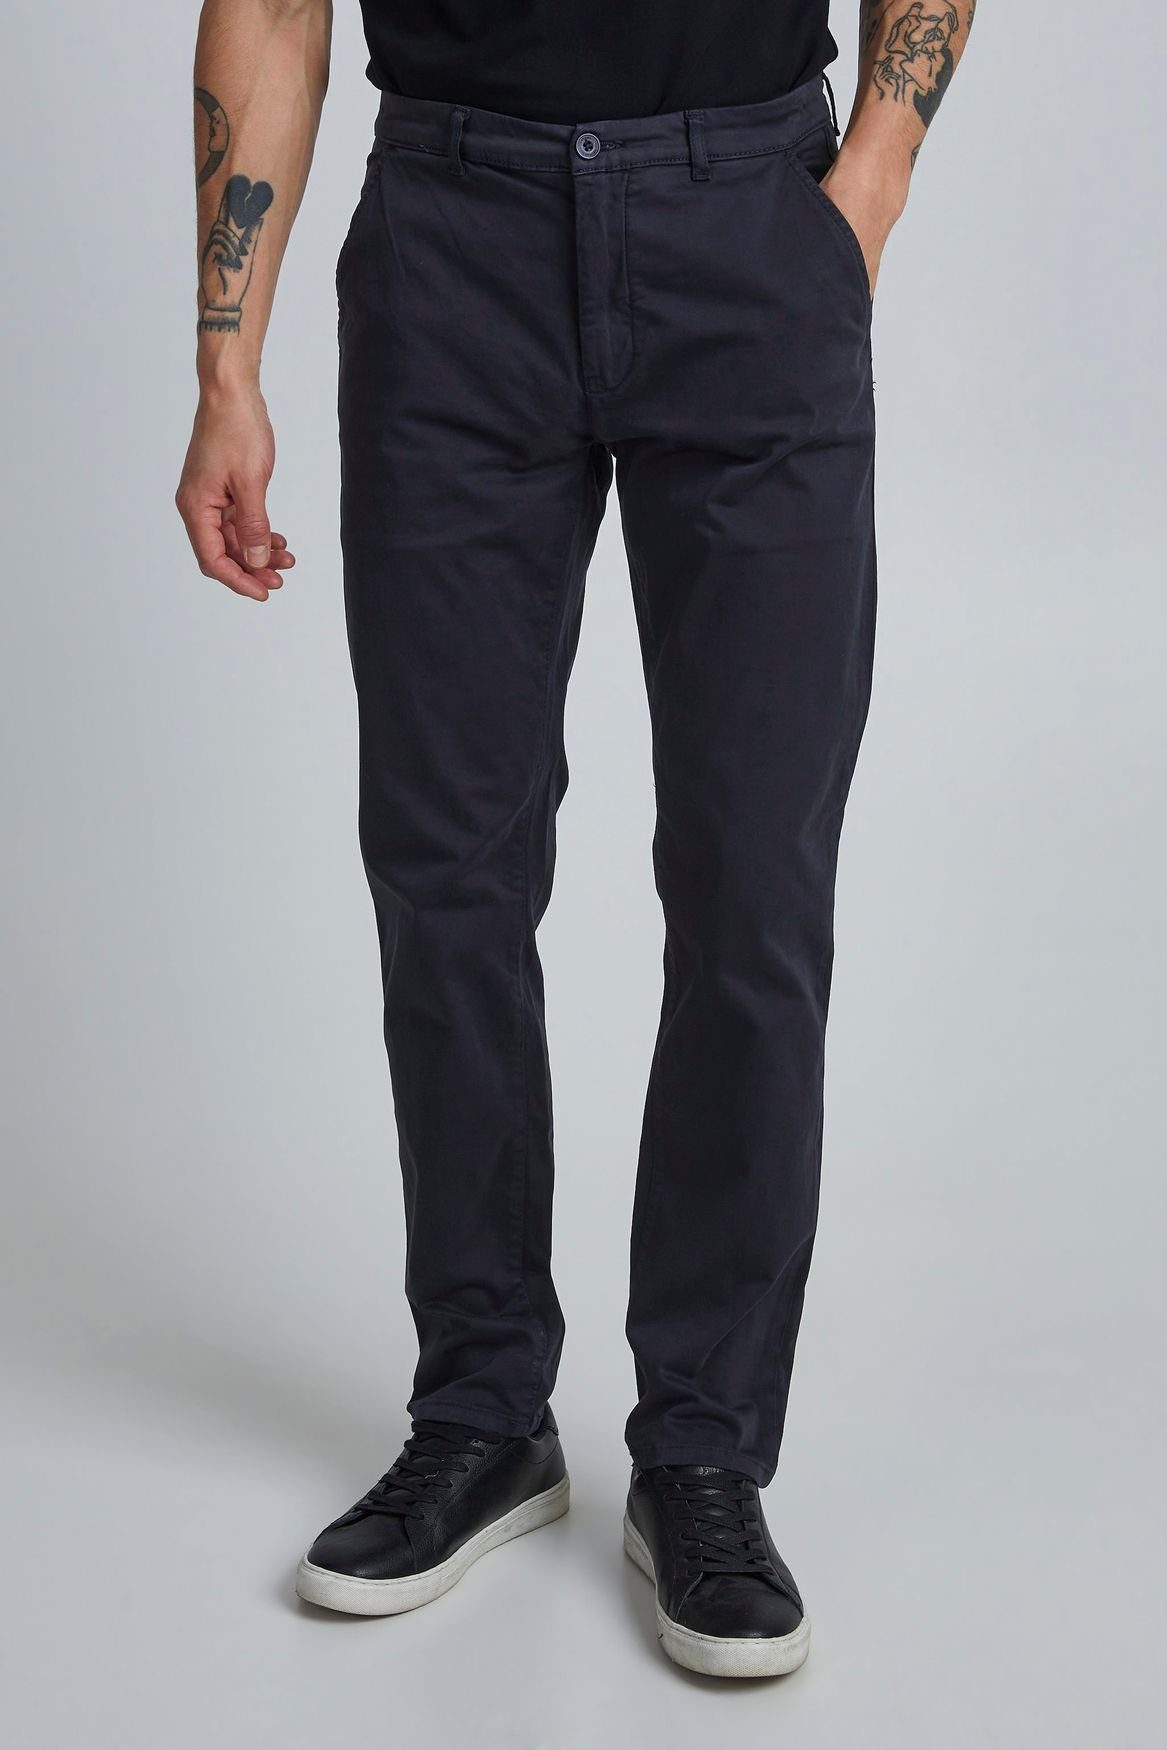 Casual Friday Chinohose Business Casual Fit 4239 Navy Hose in VIGGO Slim Stoff Chino